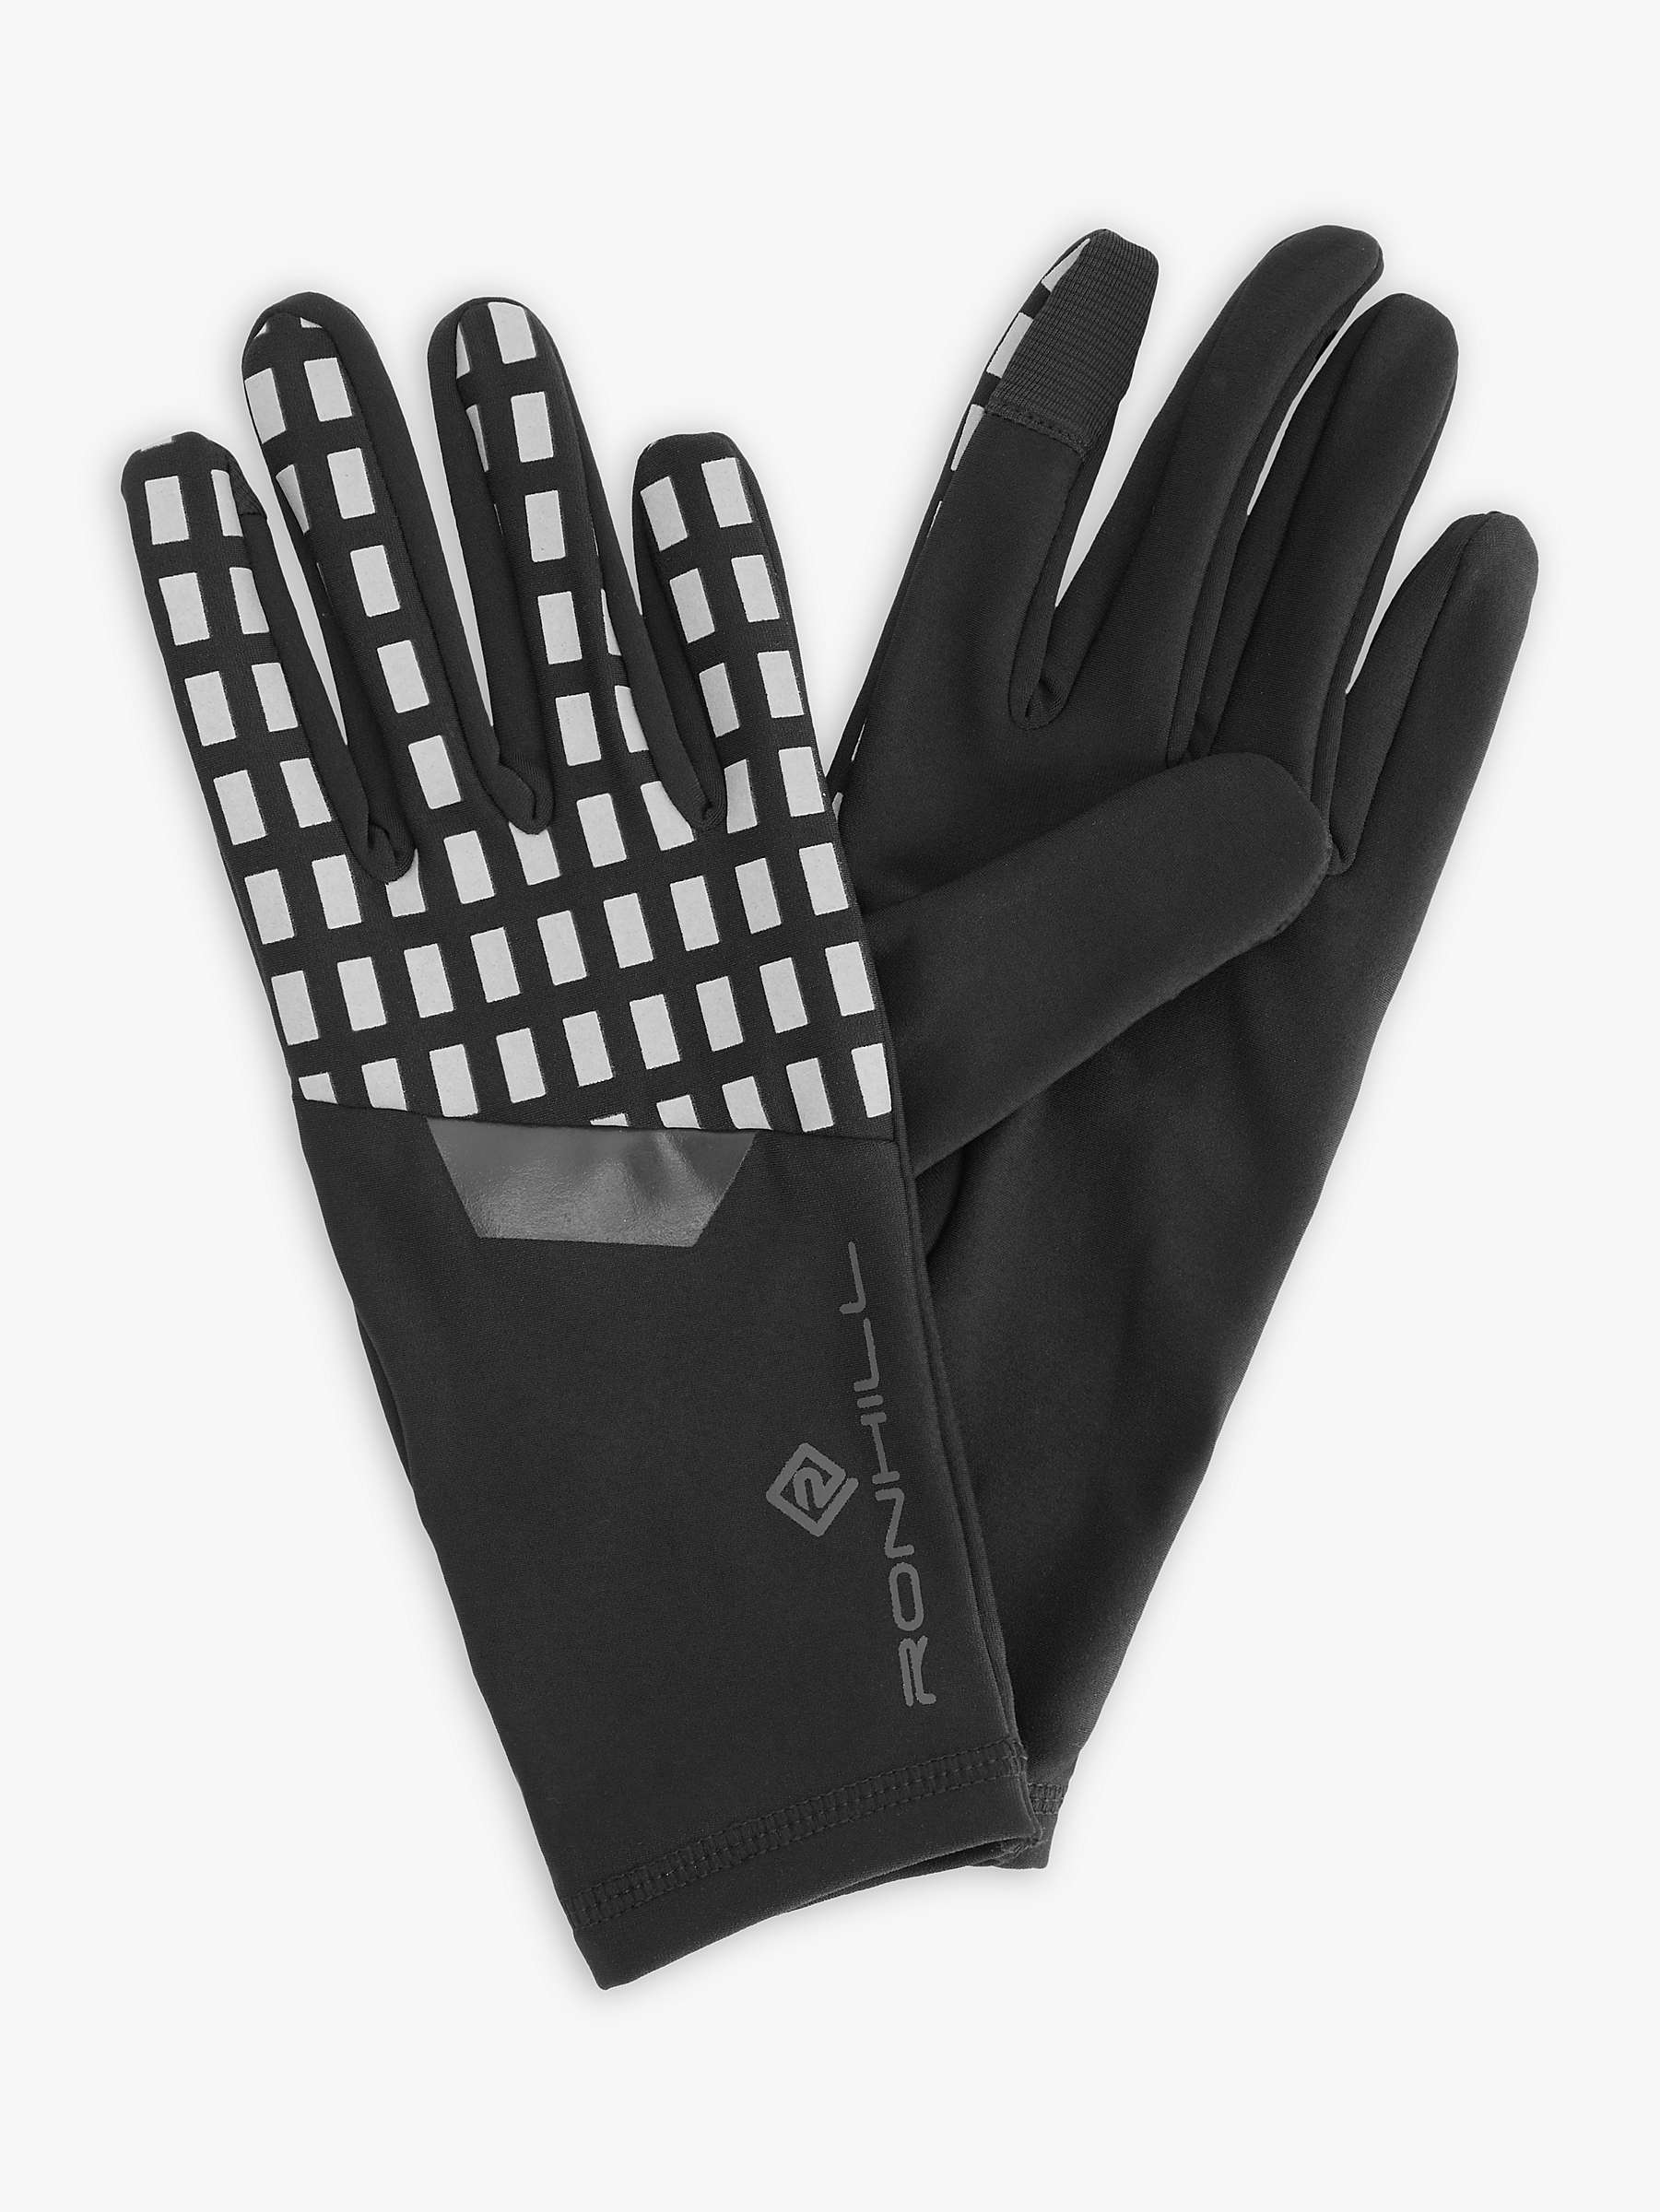 Buy Ronhill Afterhours Running Gloves Online at johnlewis.com